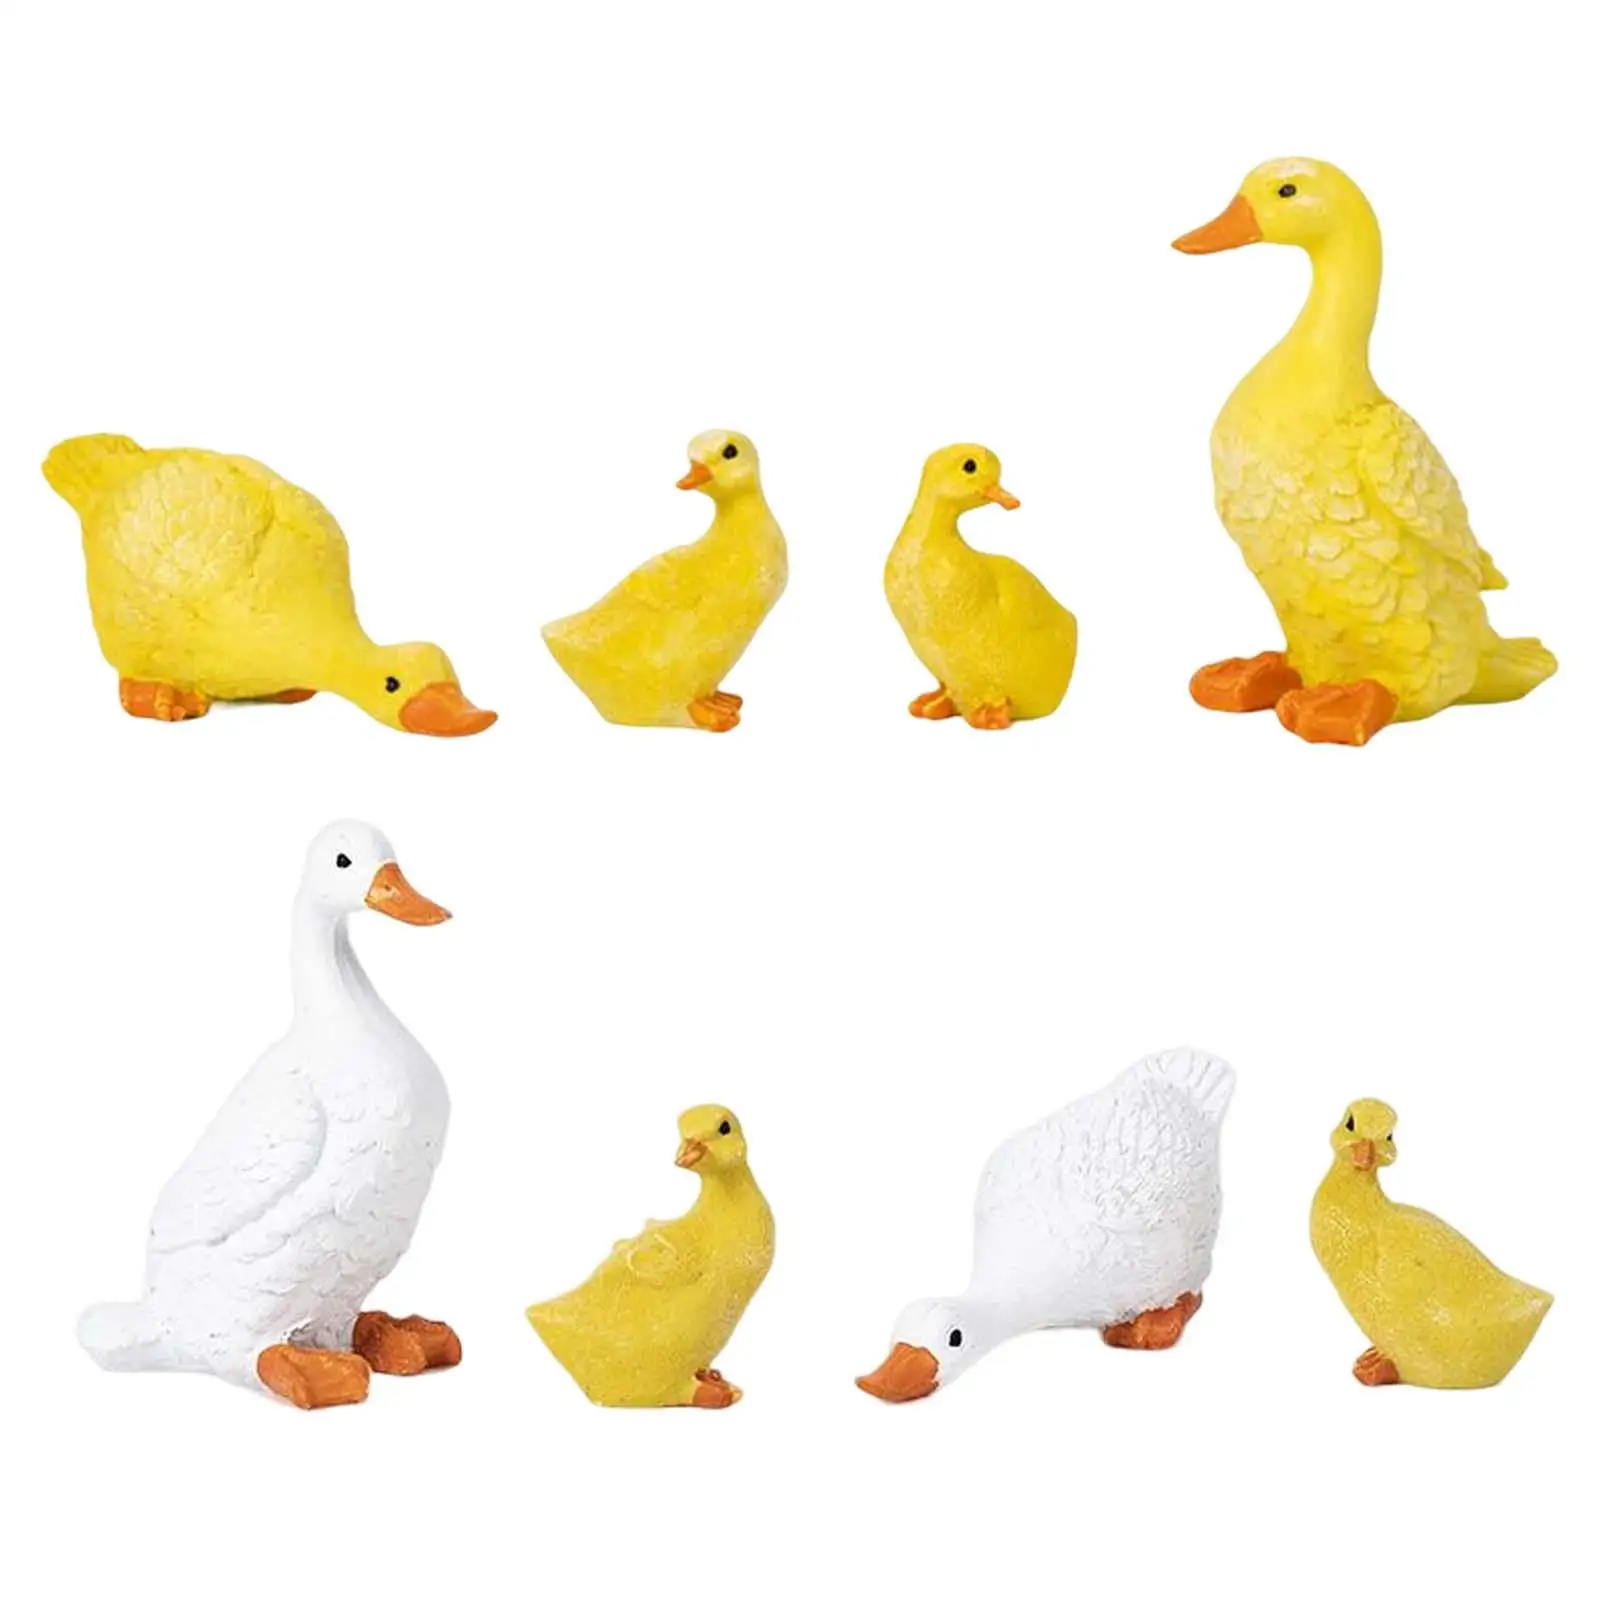 

4Pcs Cute Duck Statues Fairy Garden Resin Animal Ornaments Figurines Decoration Sculptures for Pond Outdoor Patio Home Office